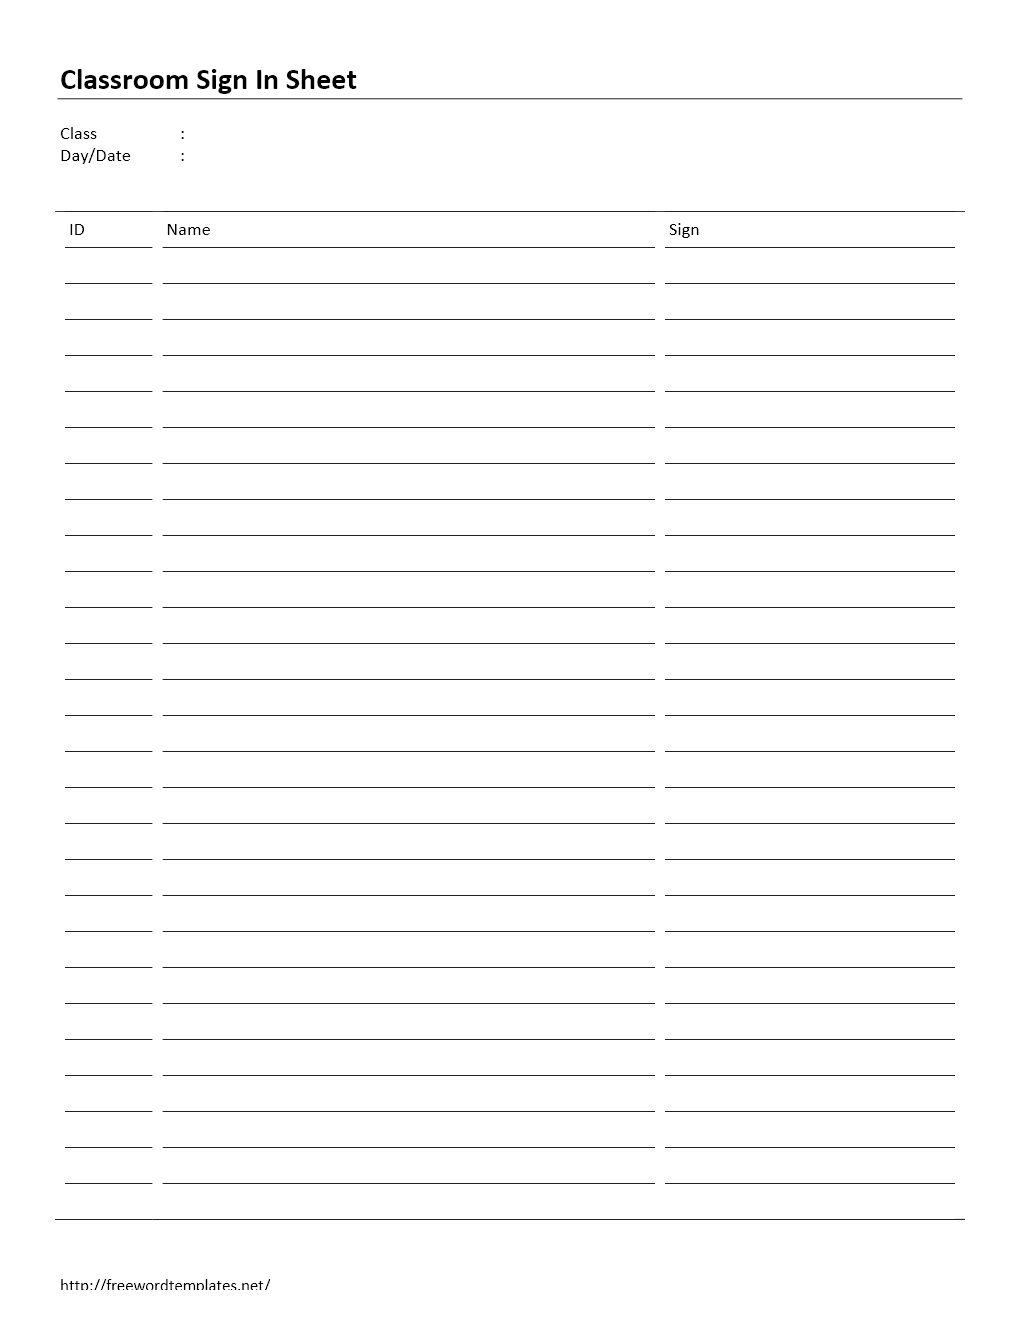 Classroom Sign In Sheet Template